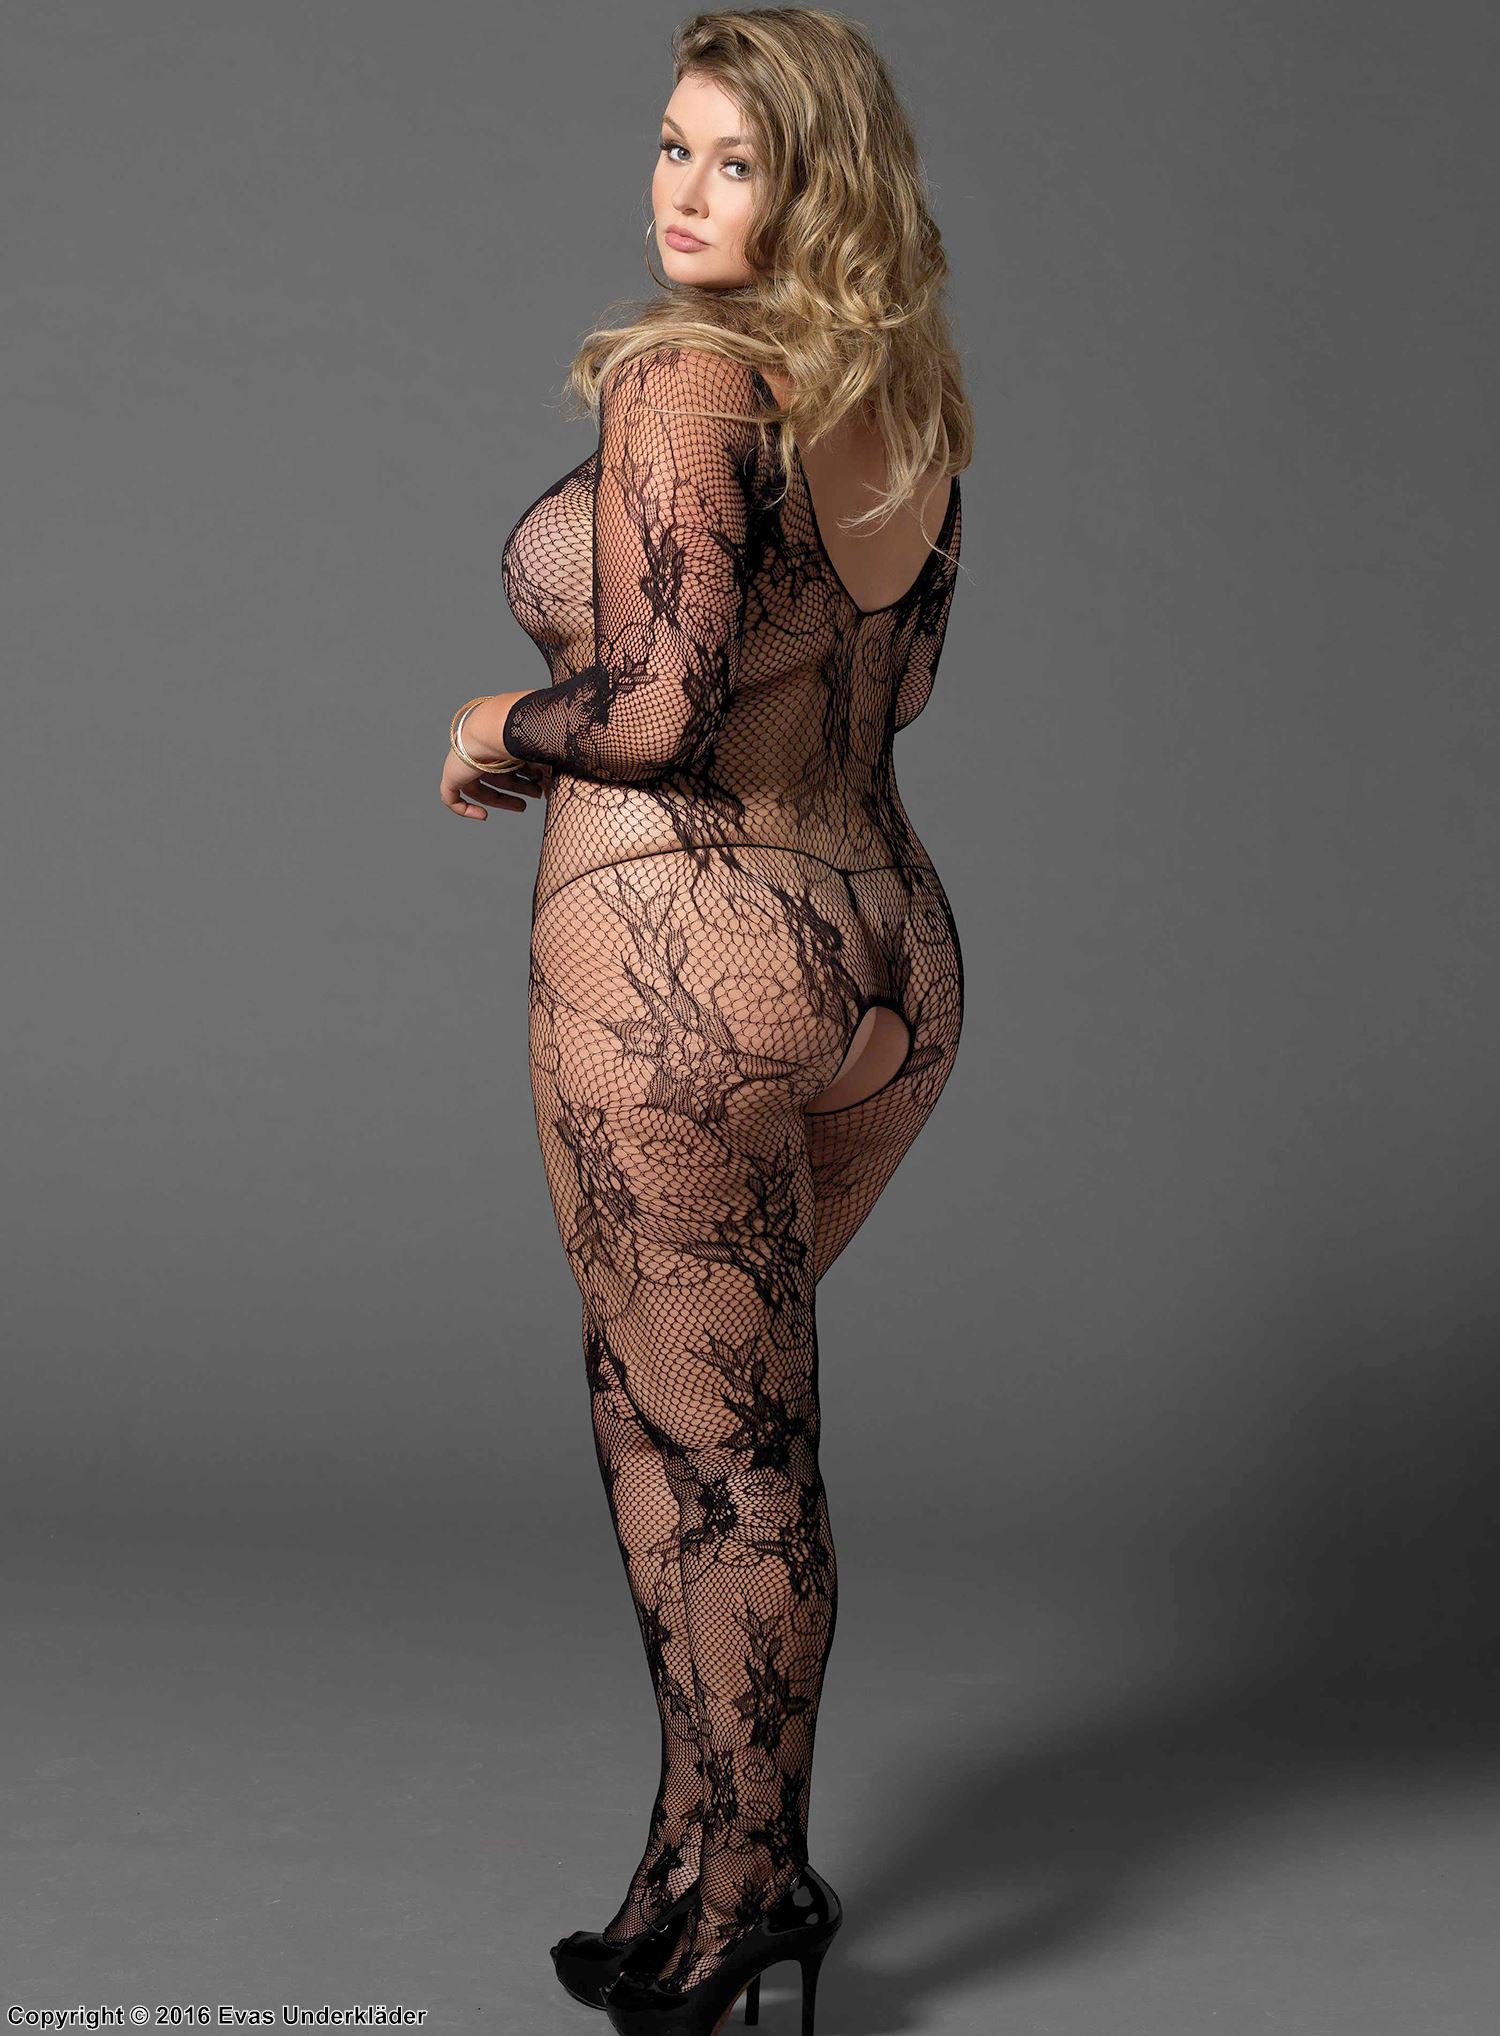 Floral lace bodystocking, plus size